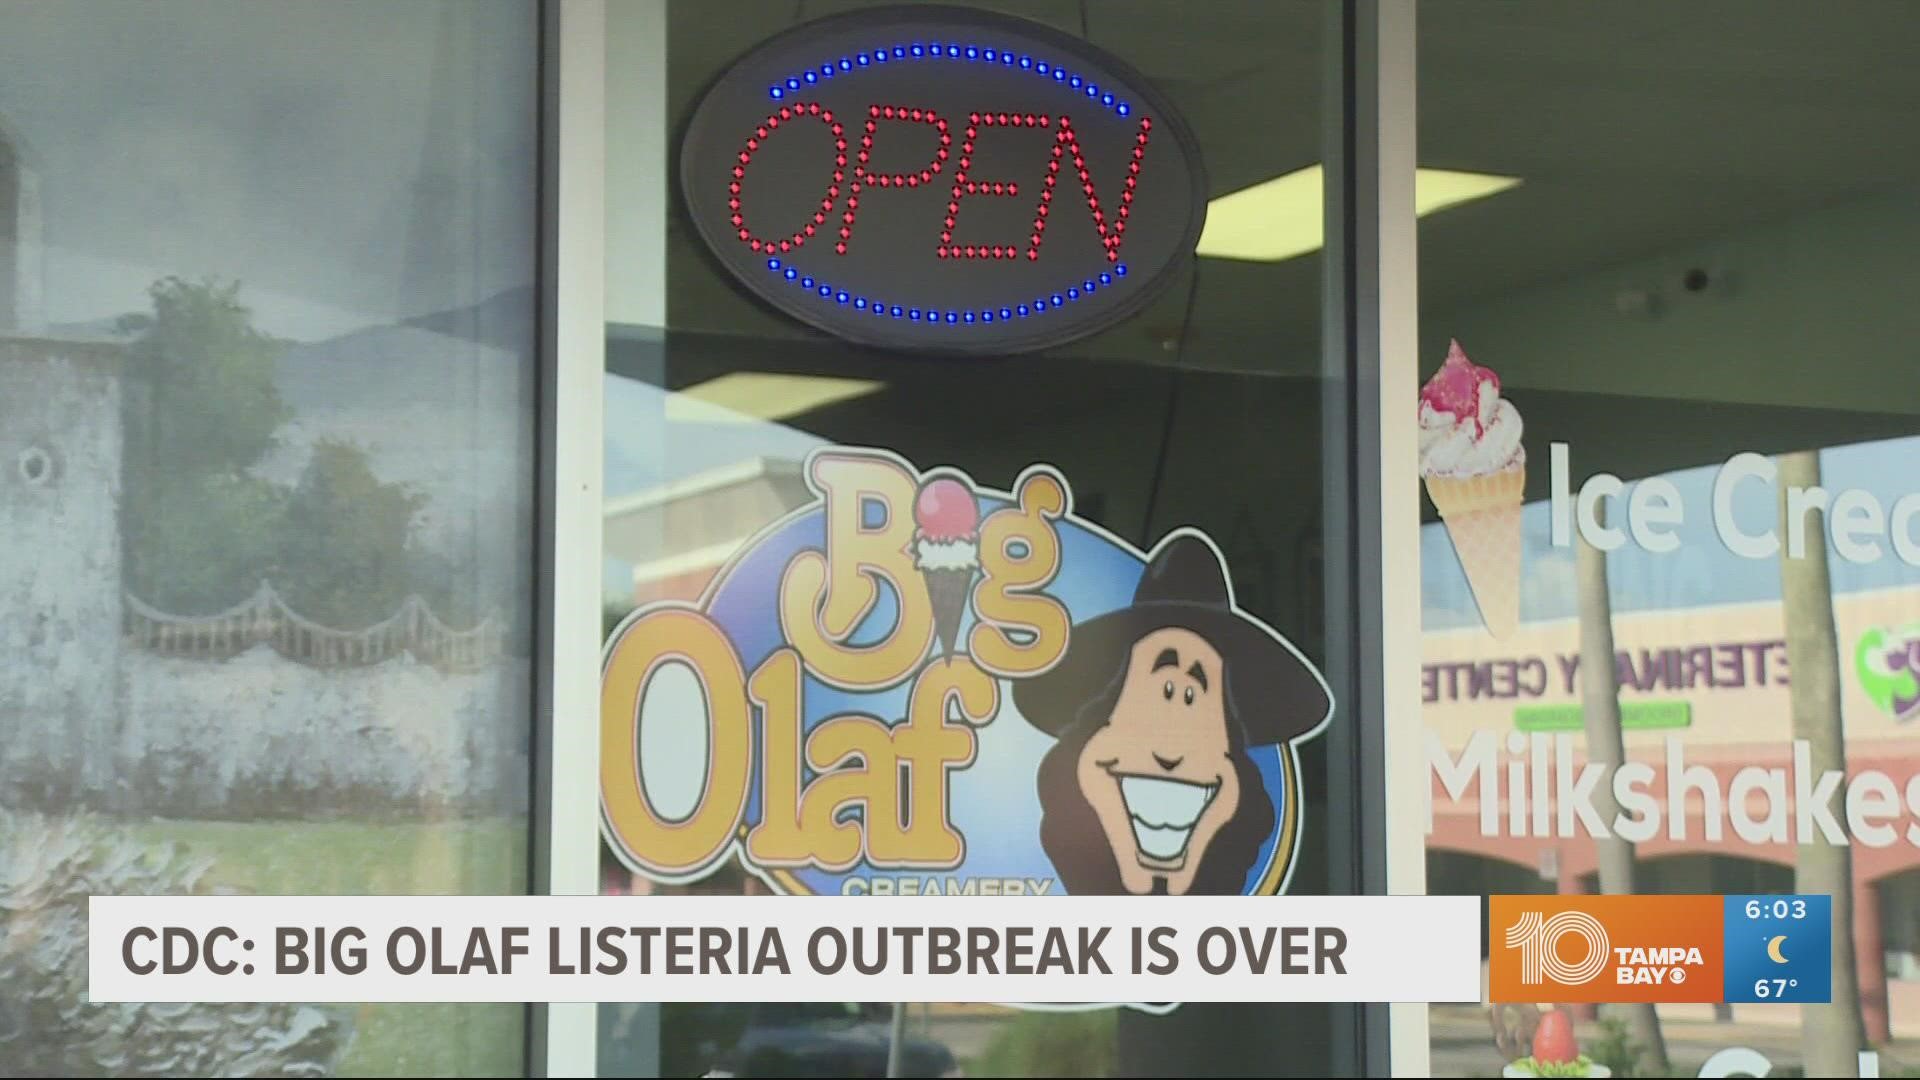 The outbreak forced the local Sarasota ice cream maker to close back in July.